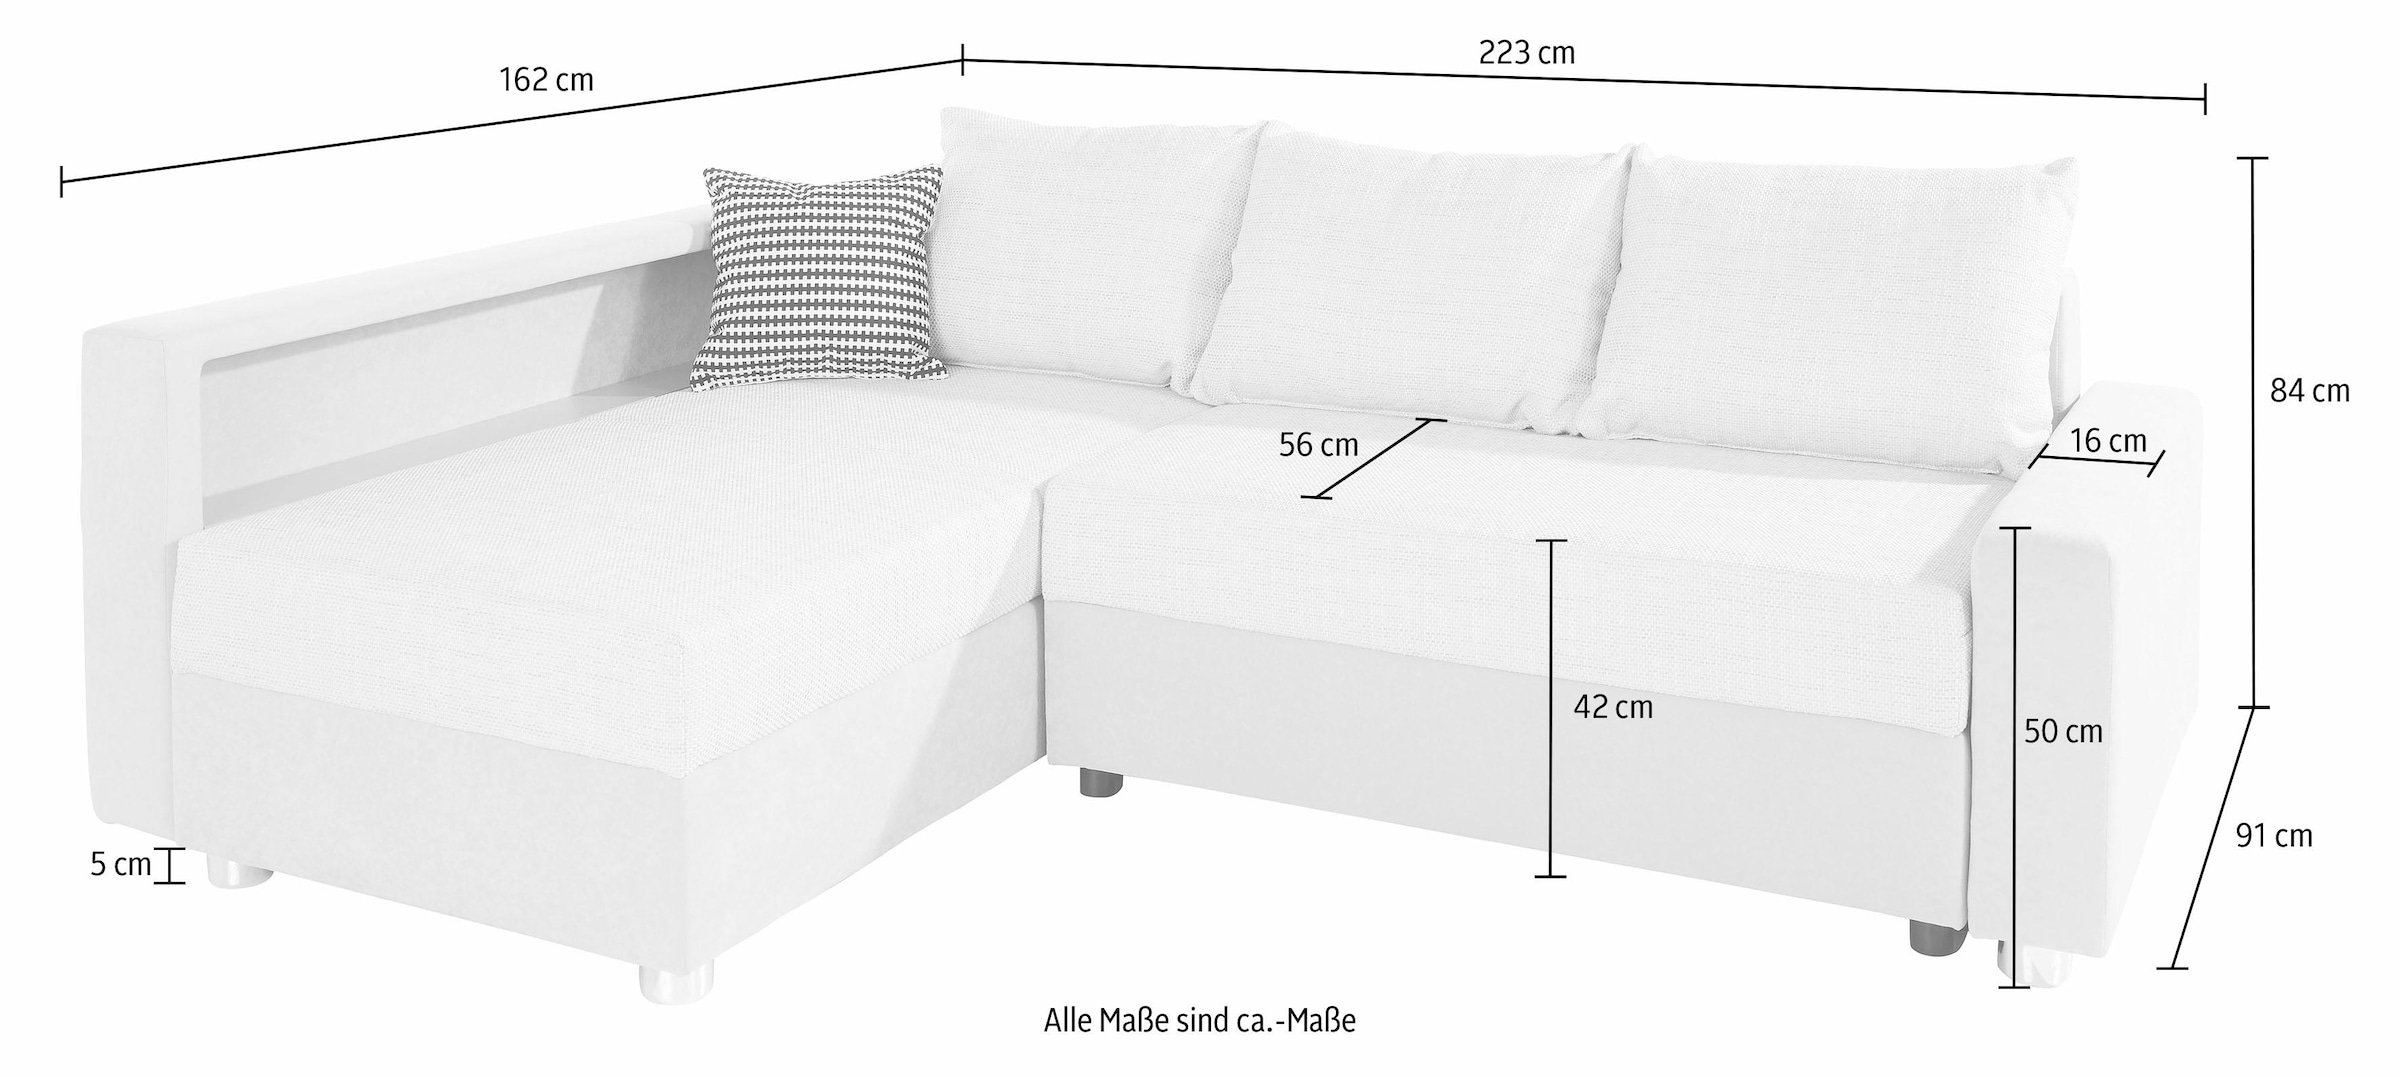 COLLECTION AB Ecksofa »Relax«, inklusive wahlweise mit RGB-LED-Beleuchtung Federkern, Bettfunktion